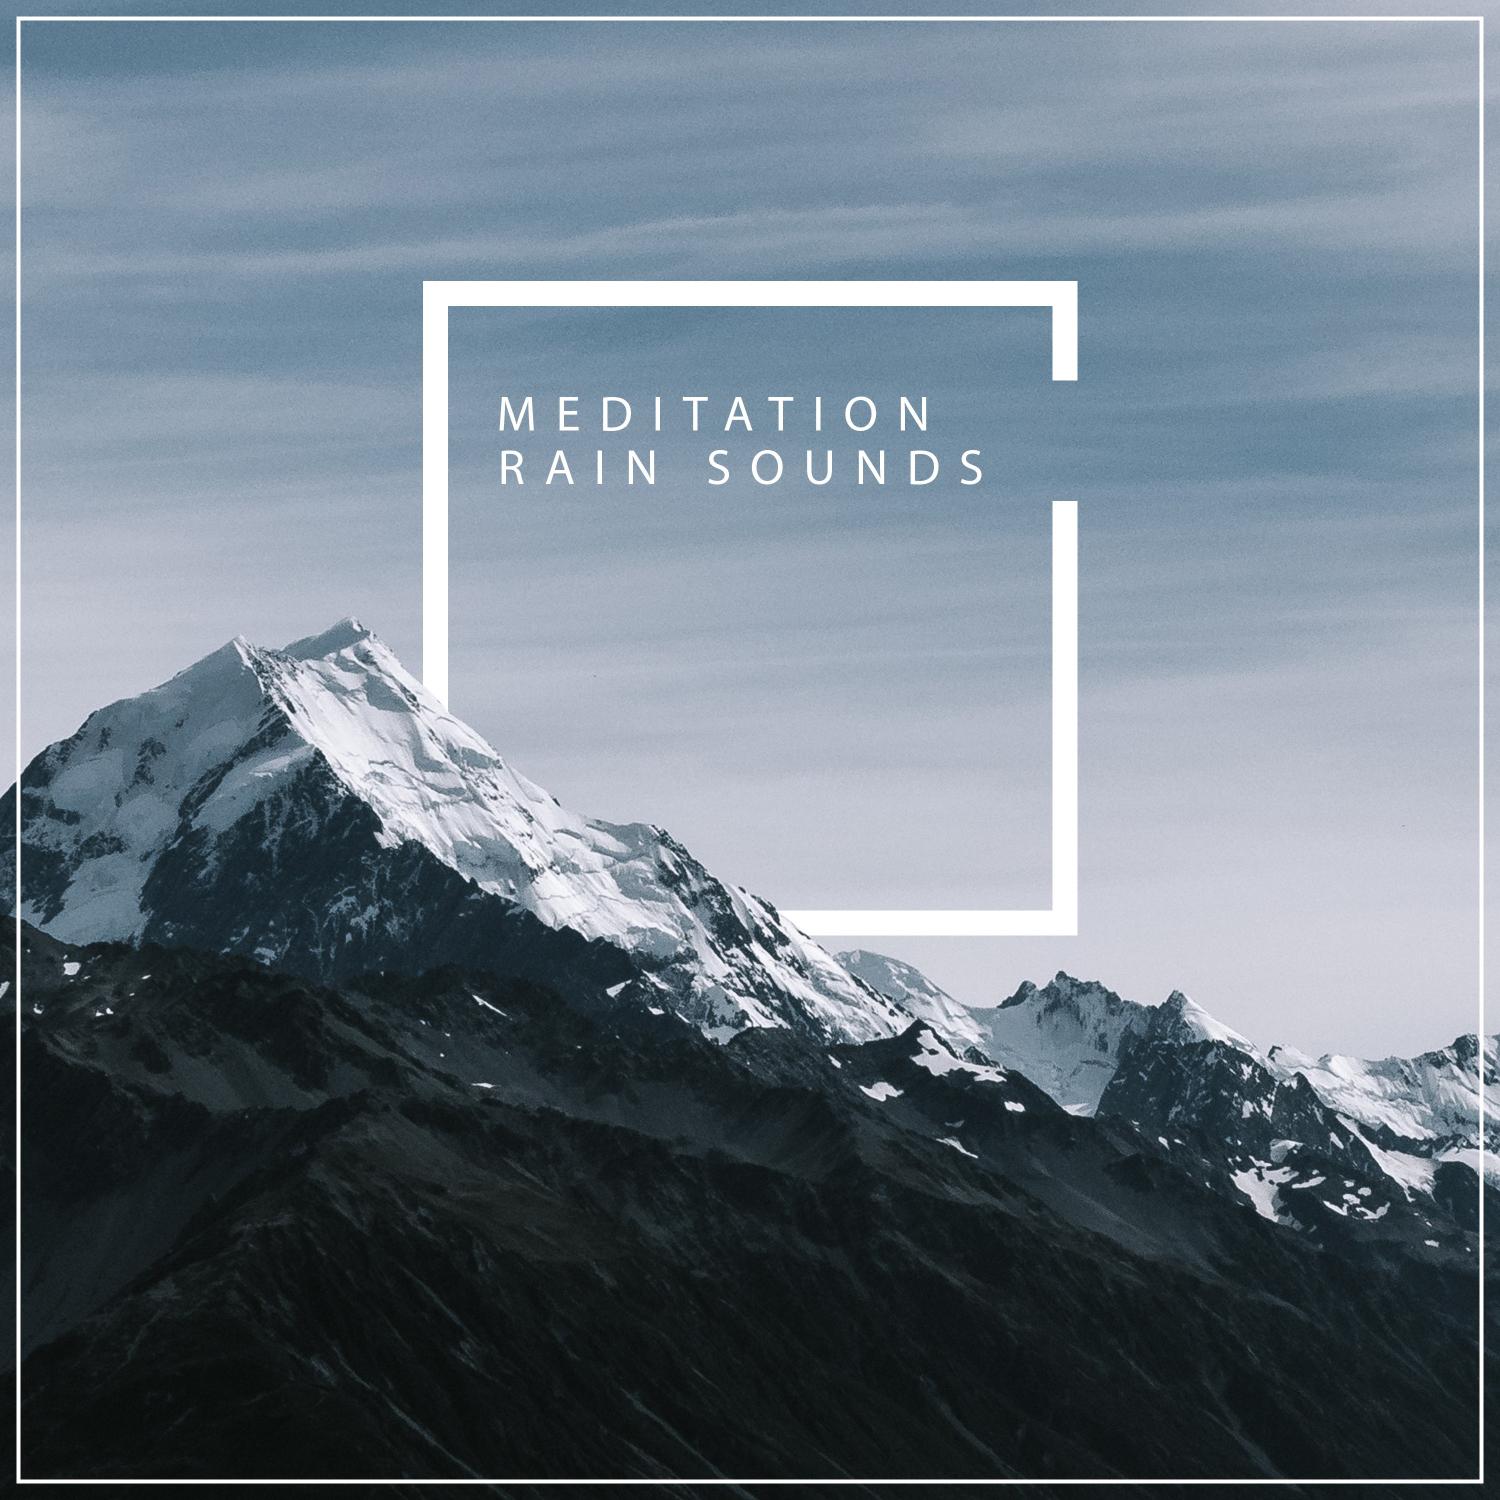 14 Meditation Rain Sounds to Calm the Mind & Relax